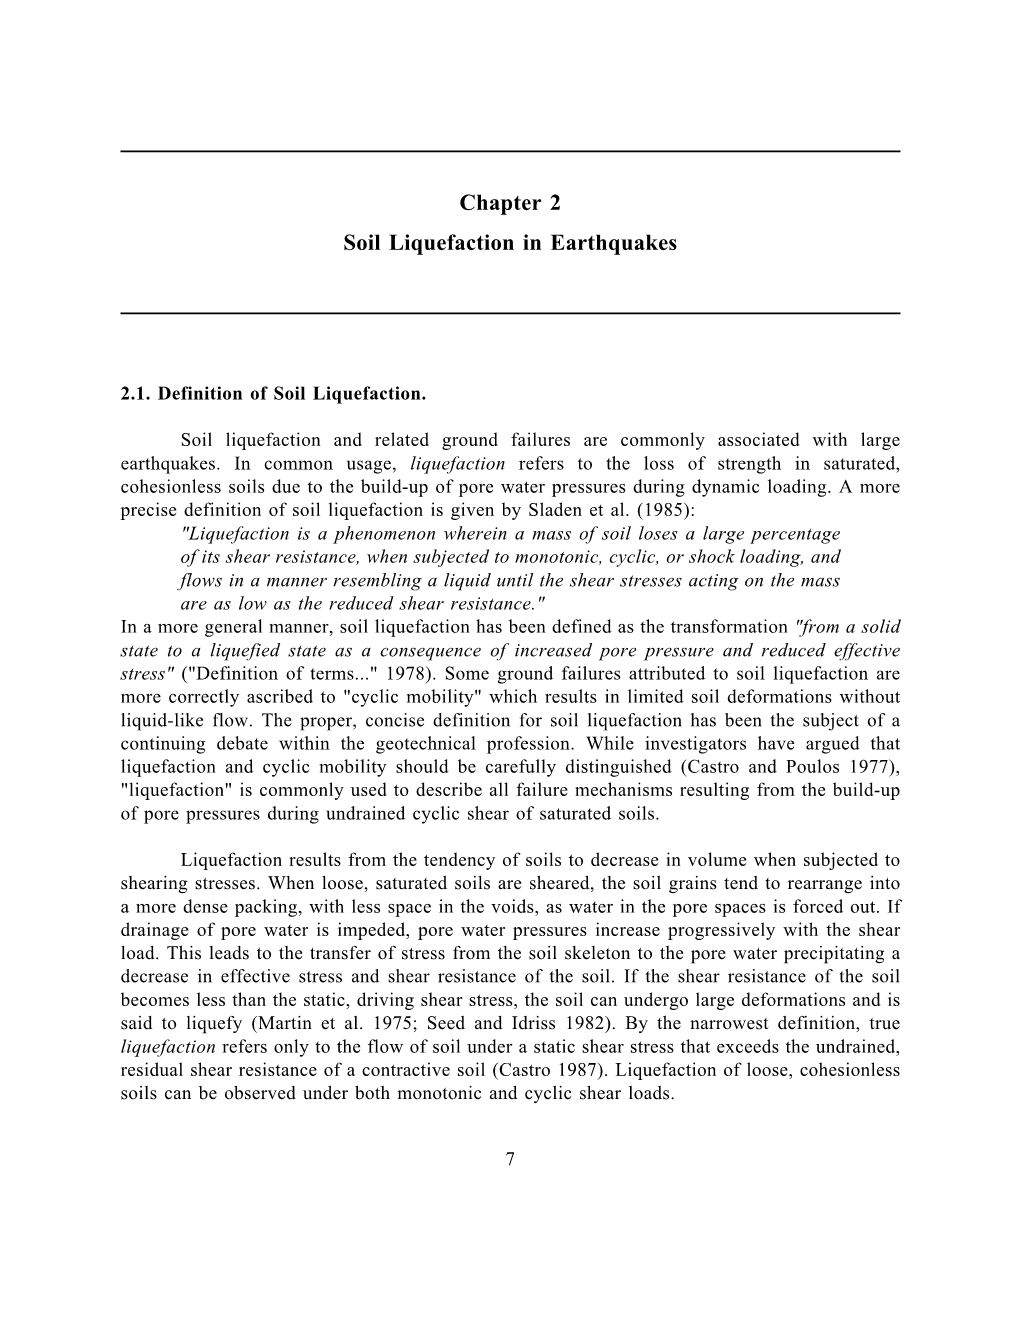 Chapter 2 Soil Liquefaction in Earthquakes